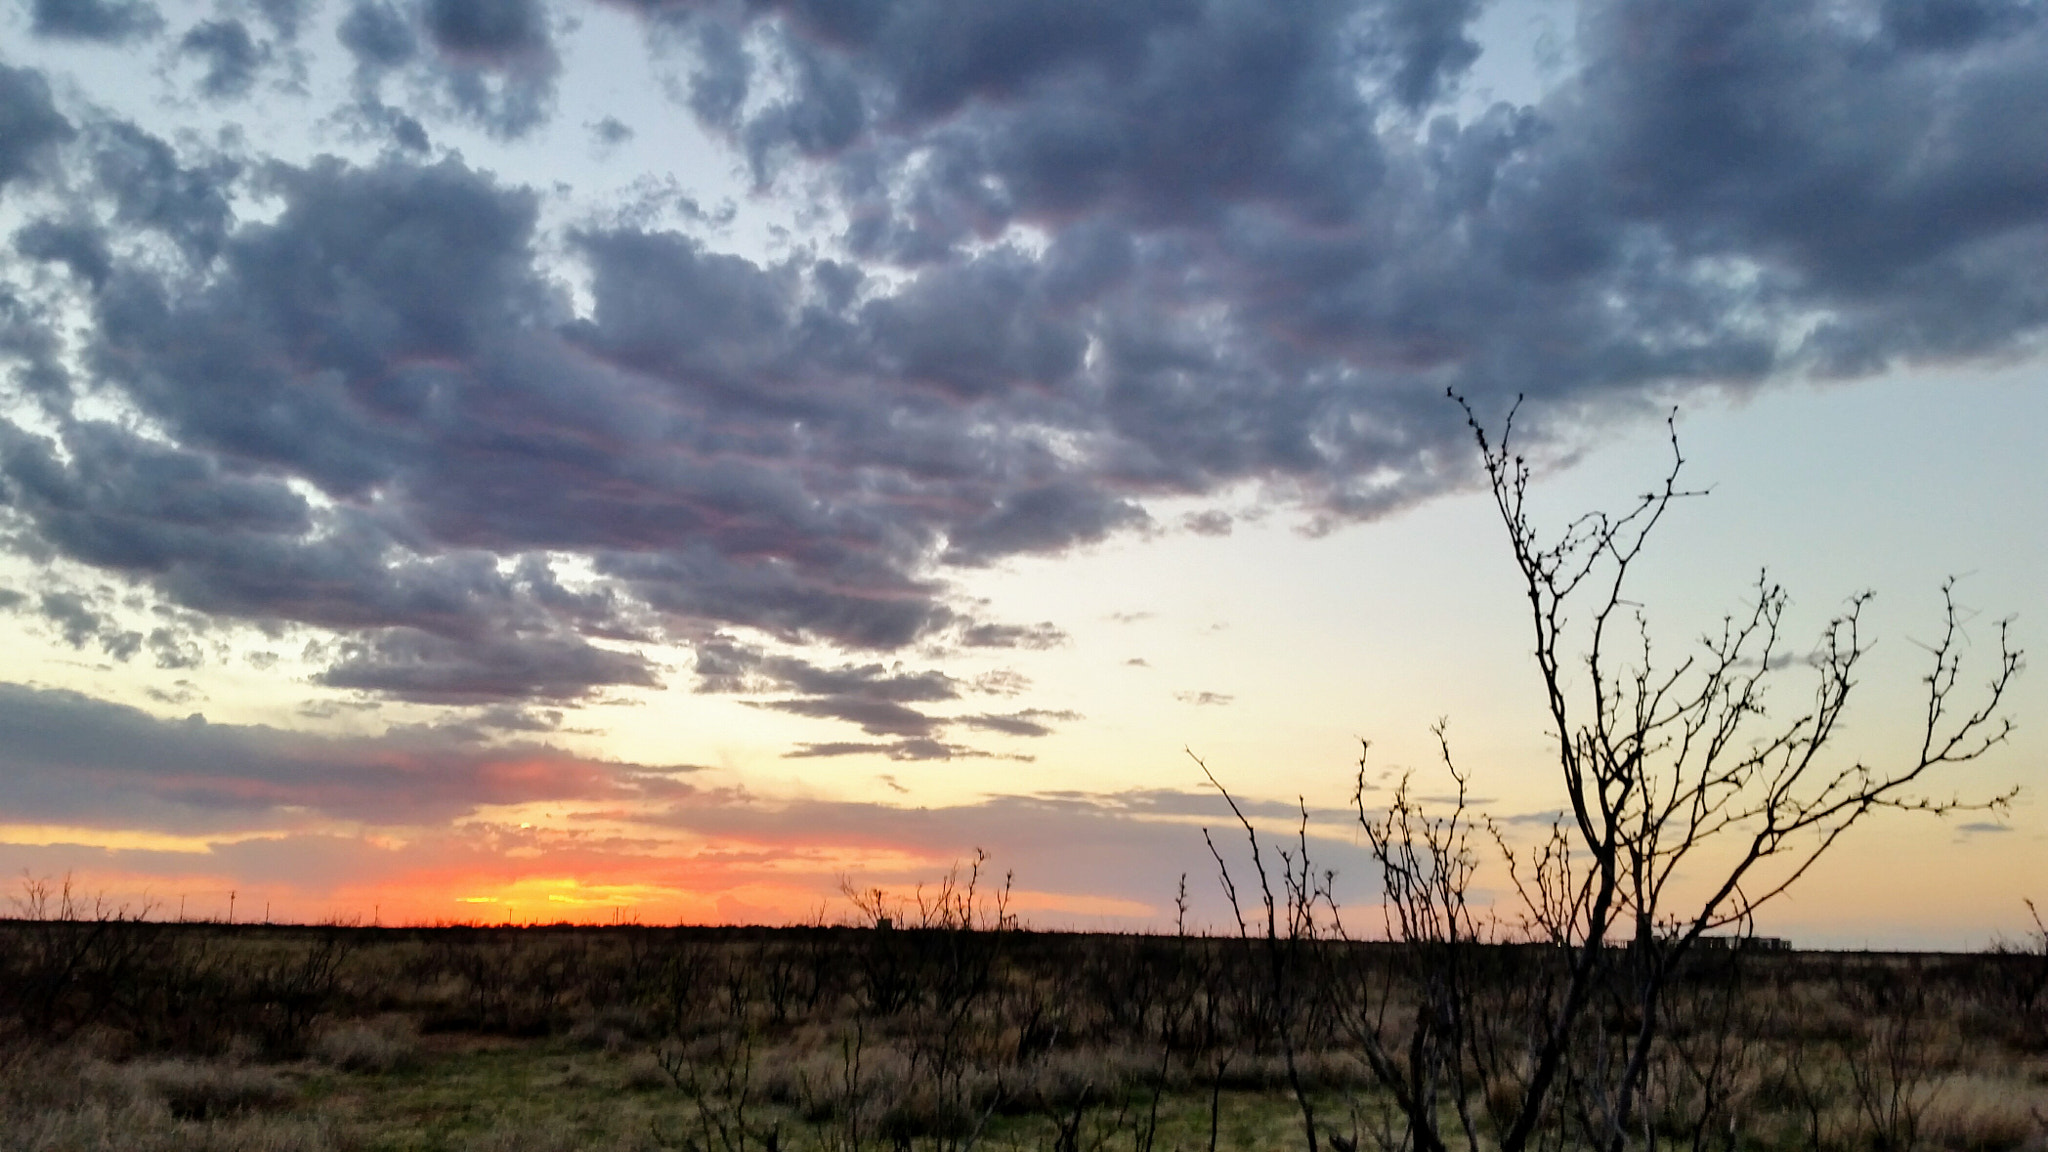 Samsung Galaxy S5 Active sample photo. West texas sunset photography